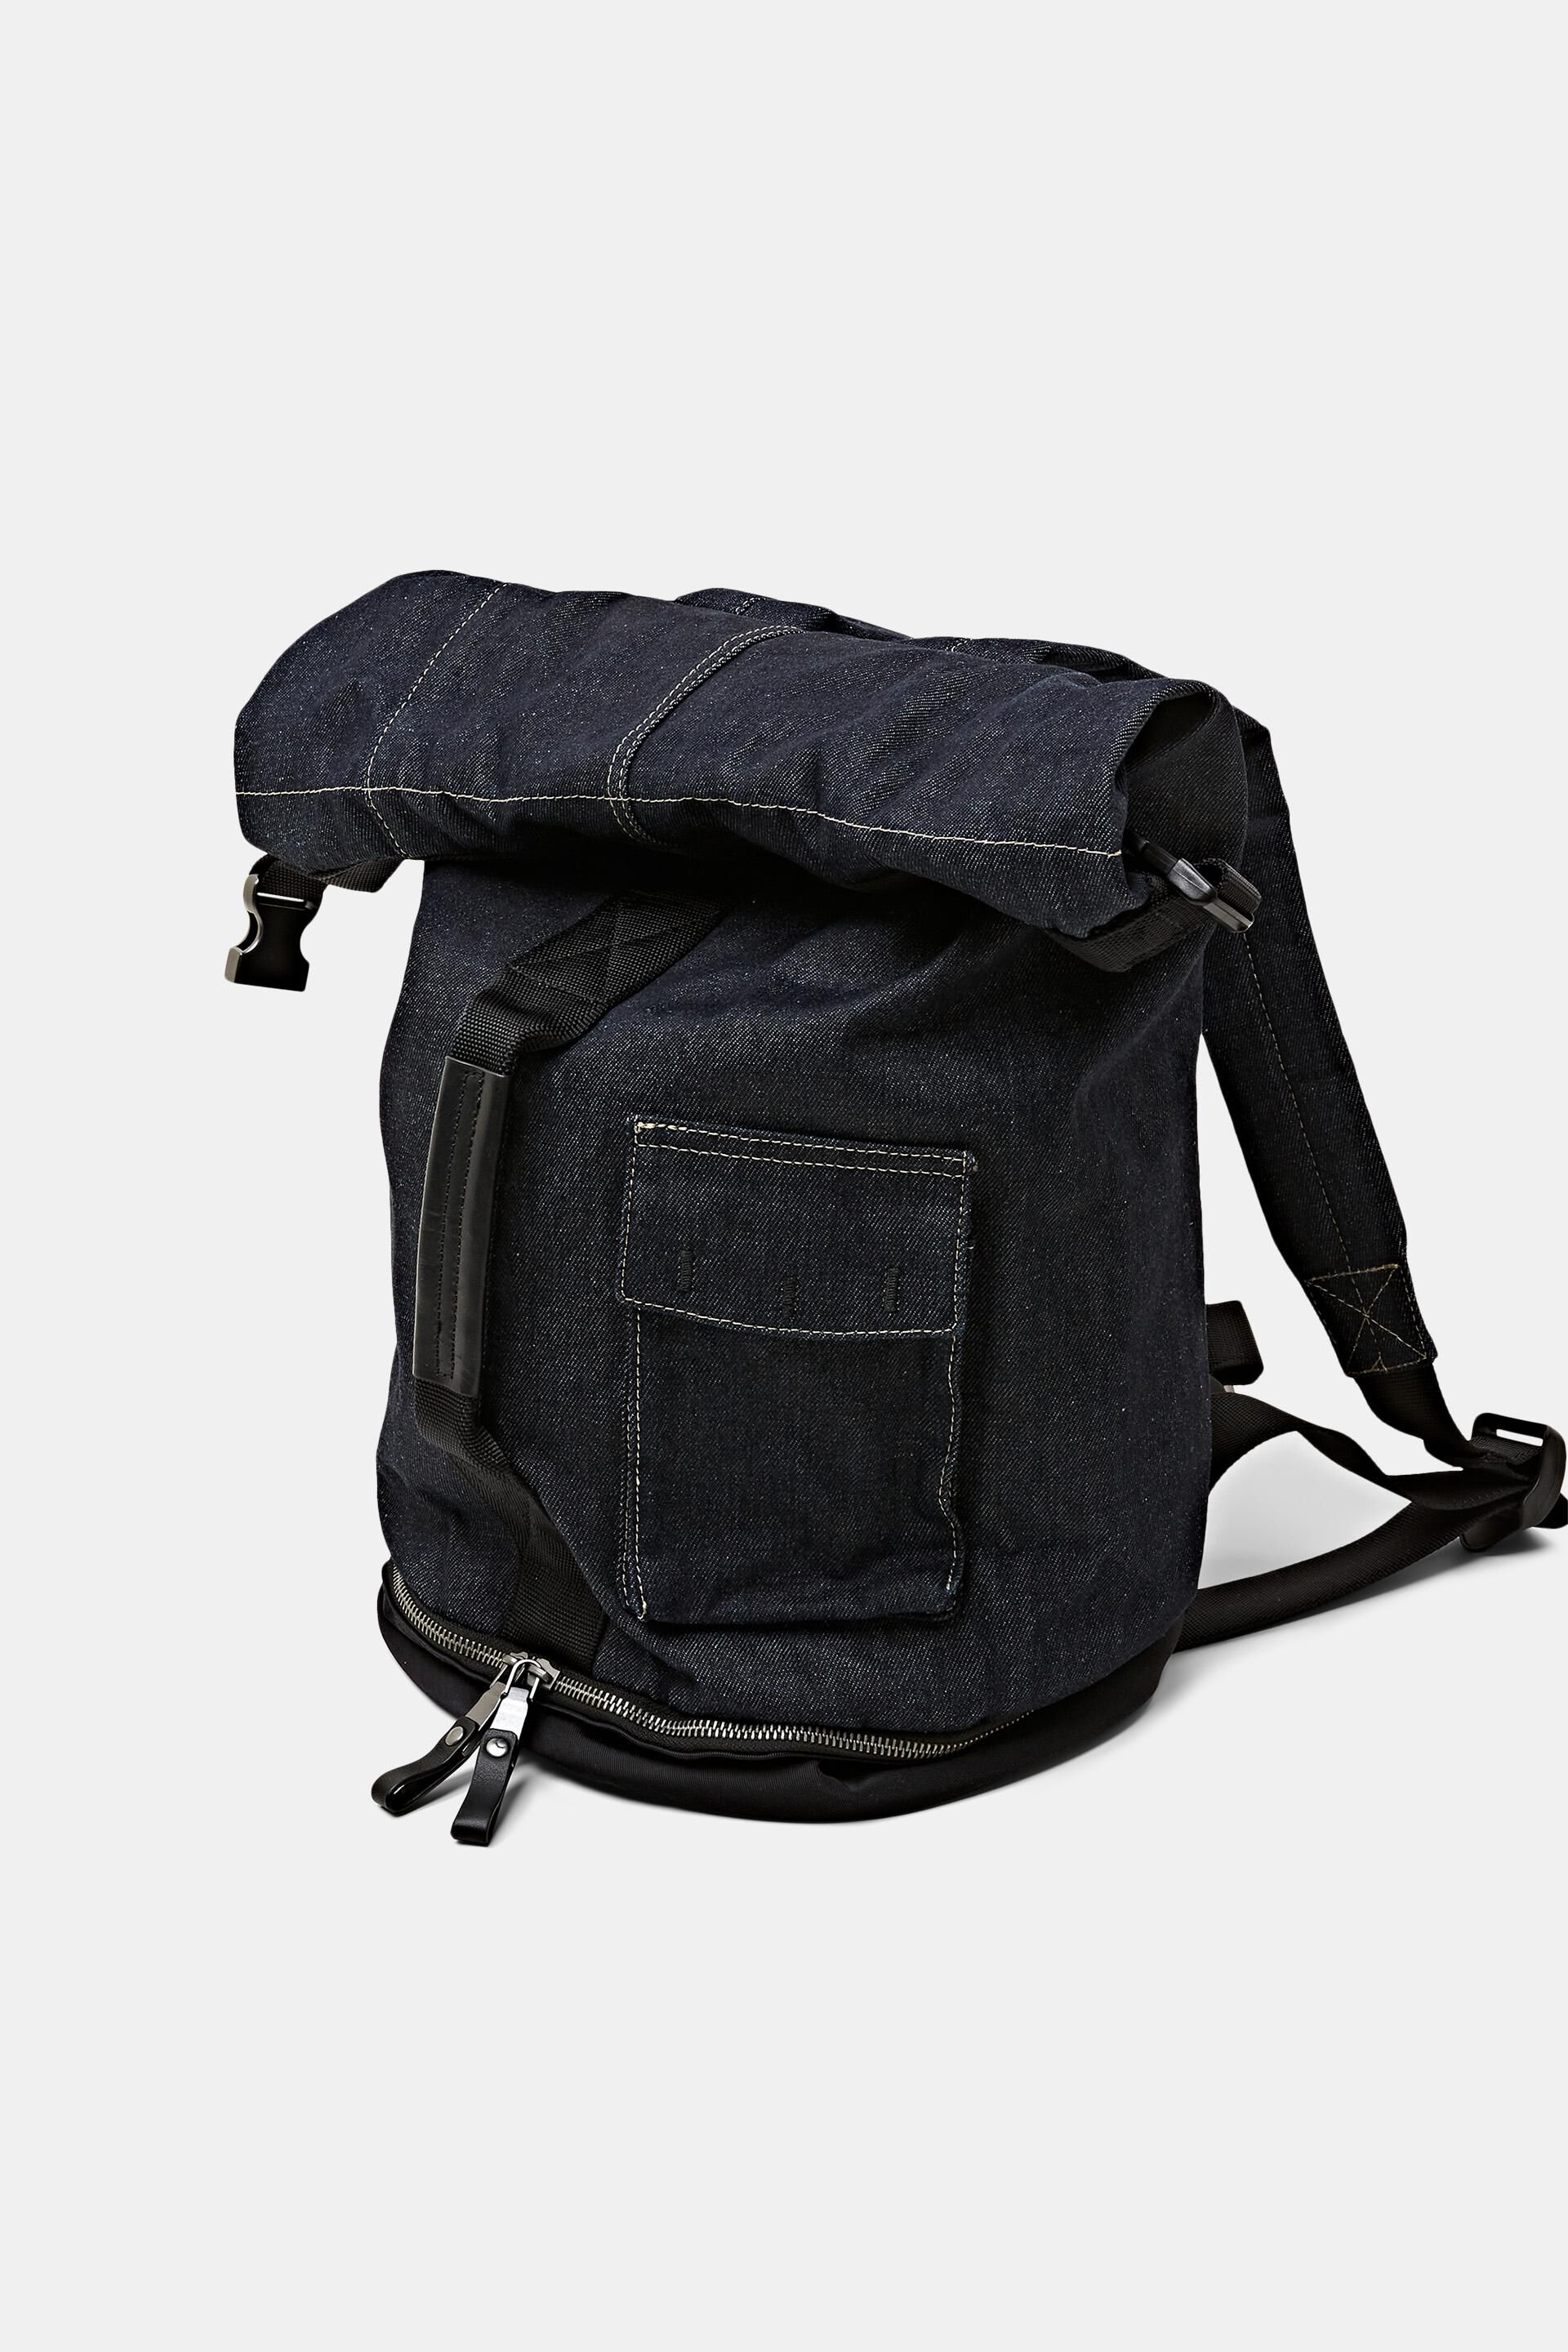 Canvas Duffle Backpack | Backpacks, Urban outfitters men, Urban outfitters